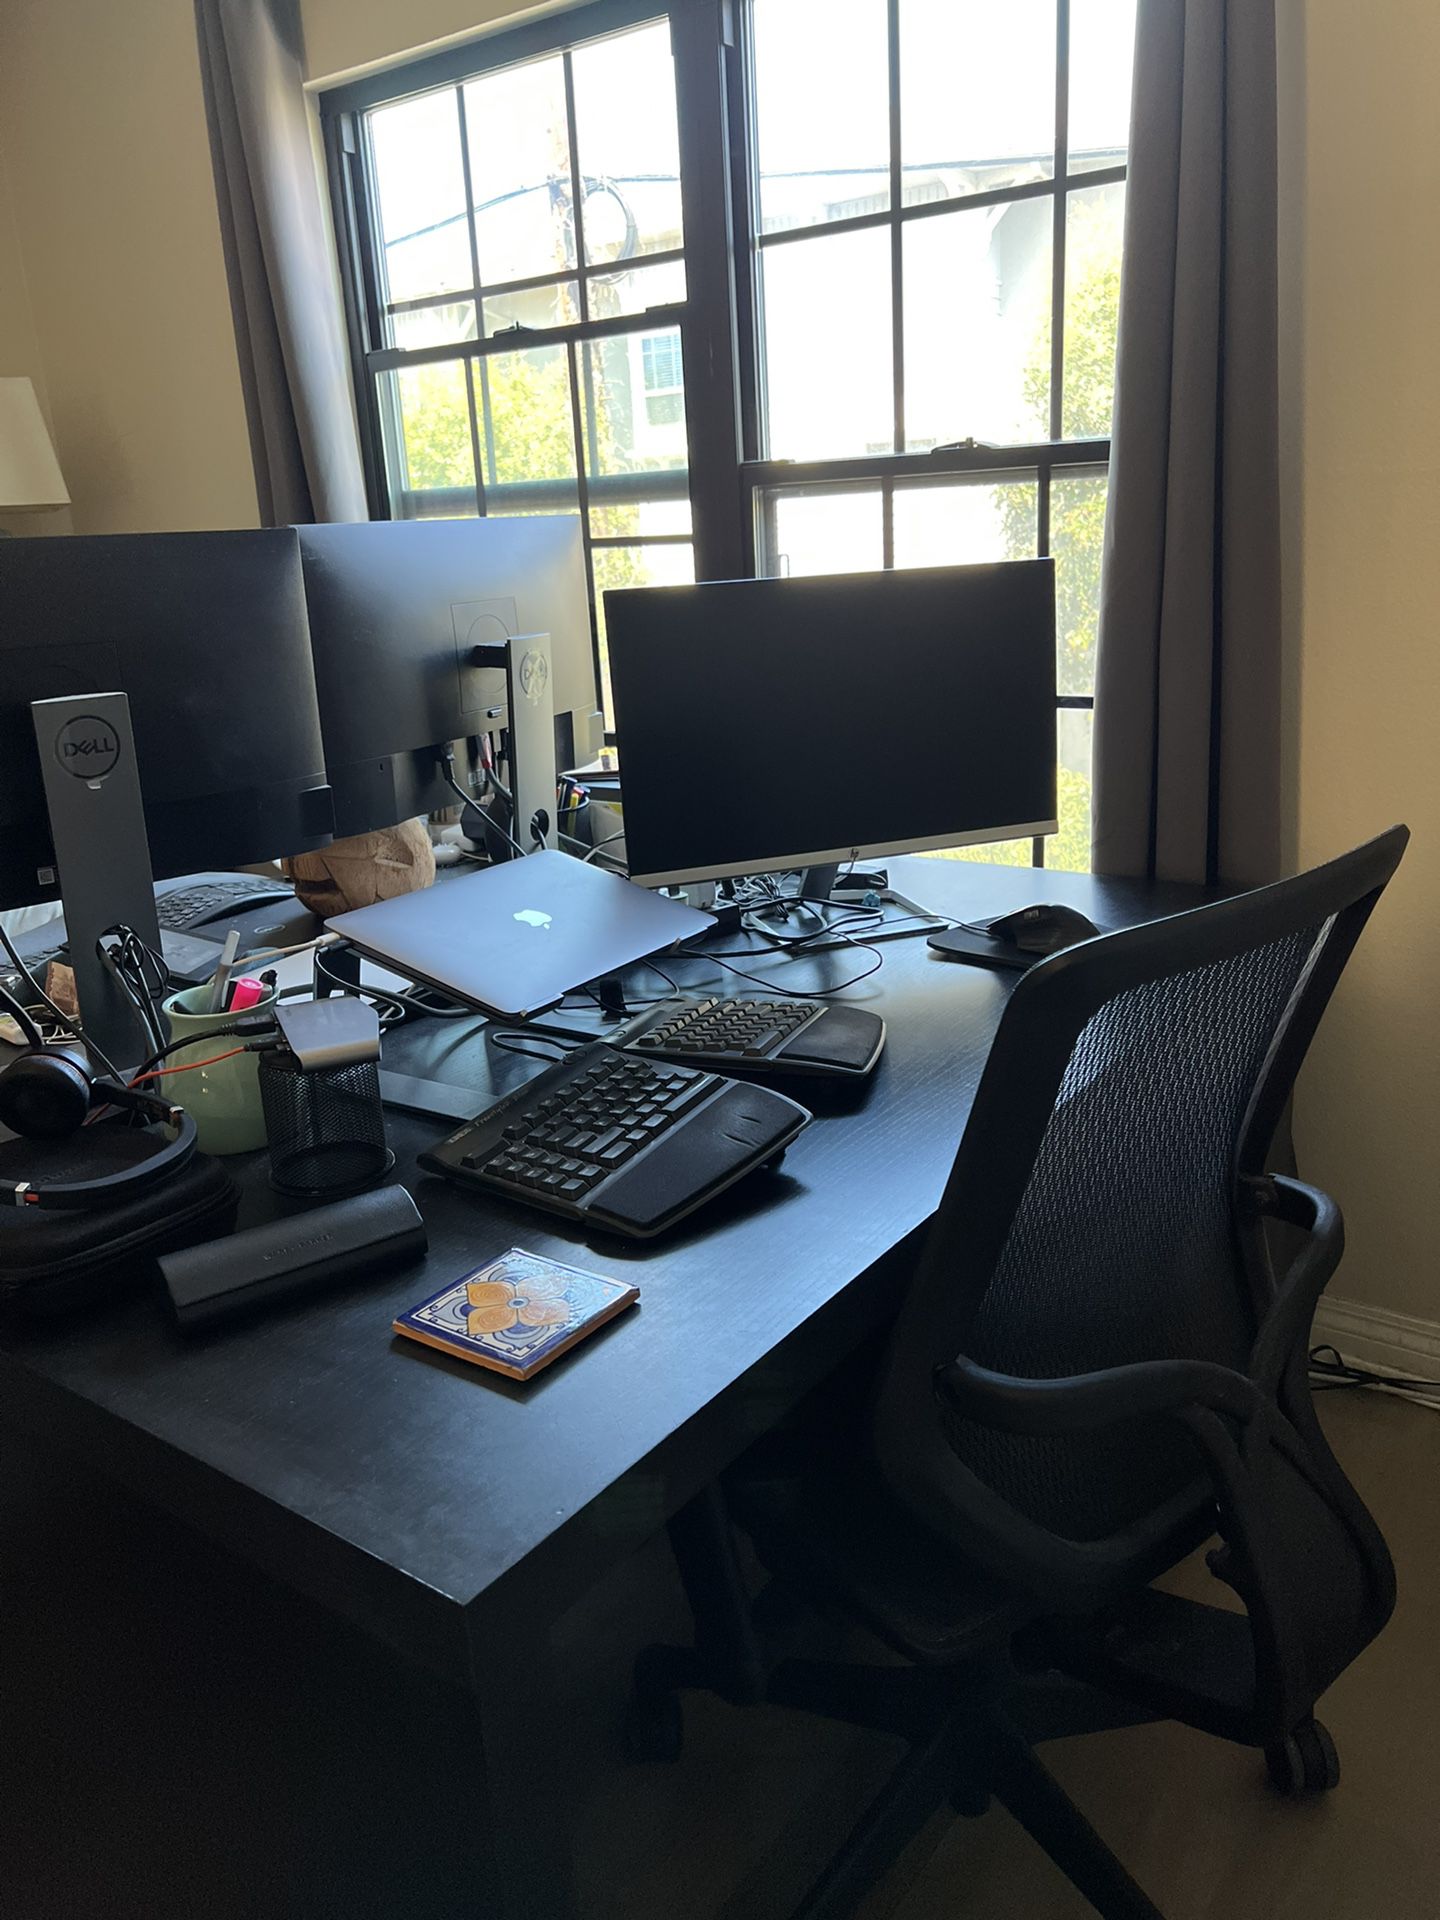 IKEA Desk for Home Office (Last chance as we move on 8/18!)